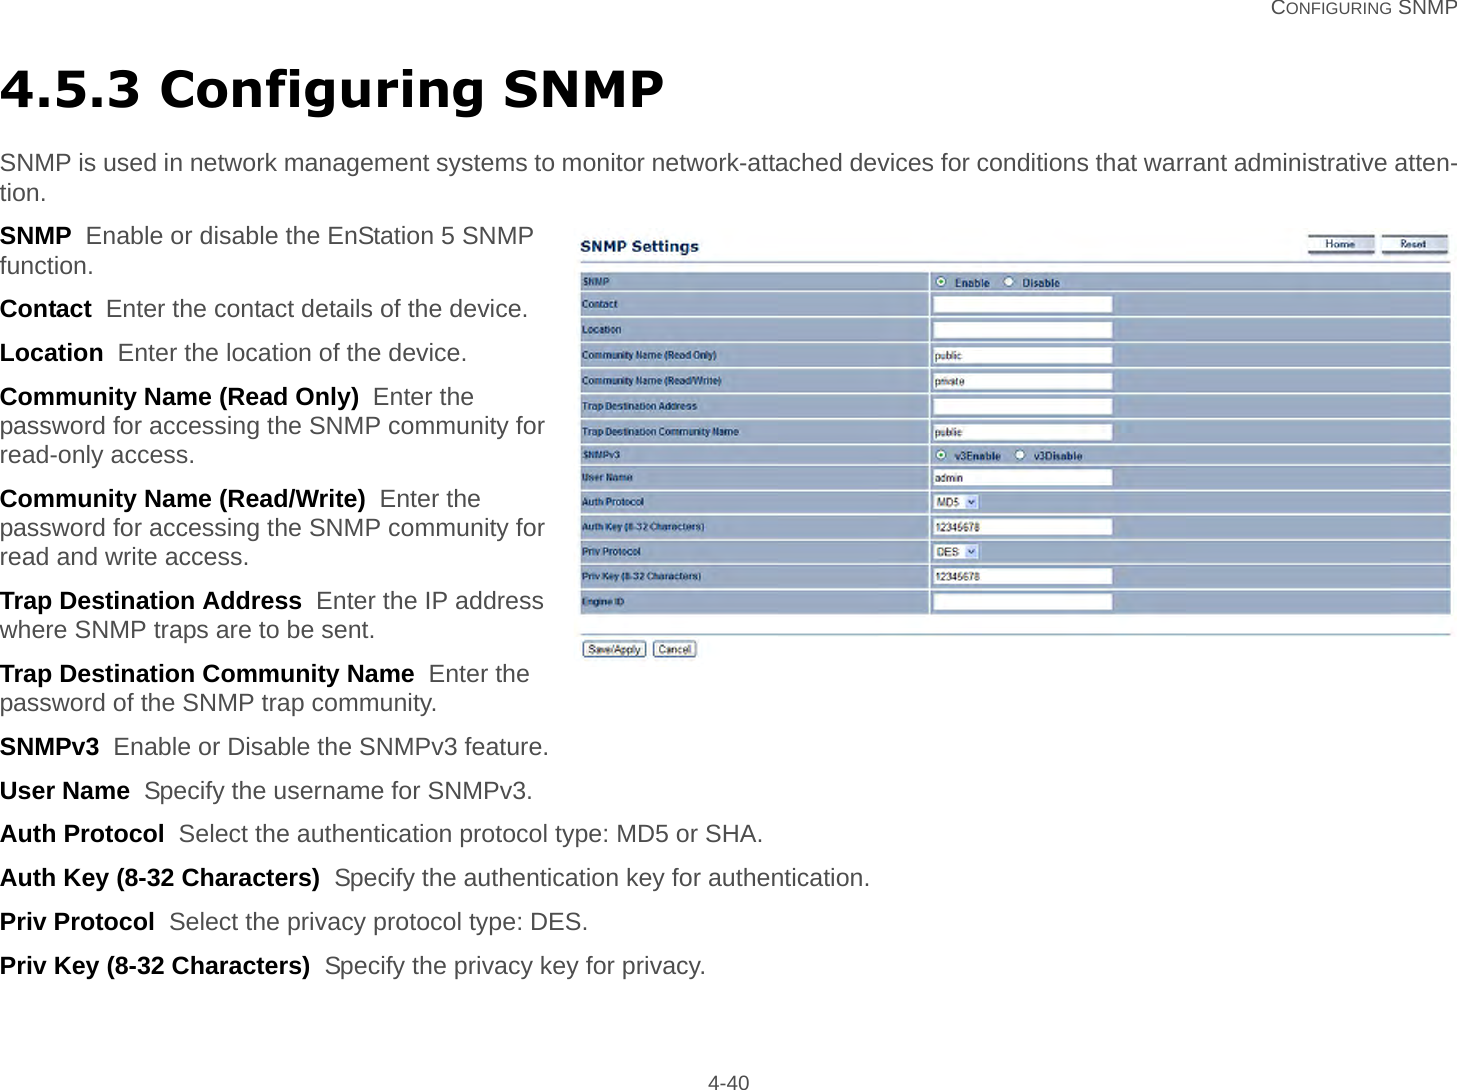   CONFIGURING SNMP 4-404.5.3 Configuring SNMPSNMP is used in network management systems to monitor network-attached devices for conditions that warrant administrative atten-tion.SNMP  Enable or disable the EnStation 5 SNMP function.Contact  Enter the contact details of the device.Location  Enter the location of the device.Community Name (Read Only)  Enter the password for accessing the SNMP community for read-only access.Community Name (Read/Write)  Enter the password for accessing the SNMP community for read and write access.Trap Destination Address  Enter the IP address where SNMP traps are to be sent.Trap Destination Community Name  Enter the password of the SNMP trap community.SNMPv3  Enable or Disable the SNMPv3 feature.User Name  Specify the username for SNMPv3.Auth Protocol  Select the authentication protocol type: MD5 or SHA.Auth Key (8-32 Characters)  Specify the authentication key for authentication.Priv Protocol  Select the privacy protocol type: DES.Priv Key (8-32 Characters)  Specify the privacy key for privacy.